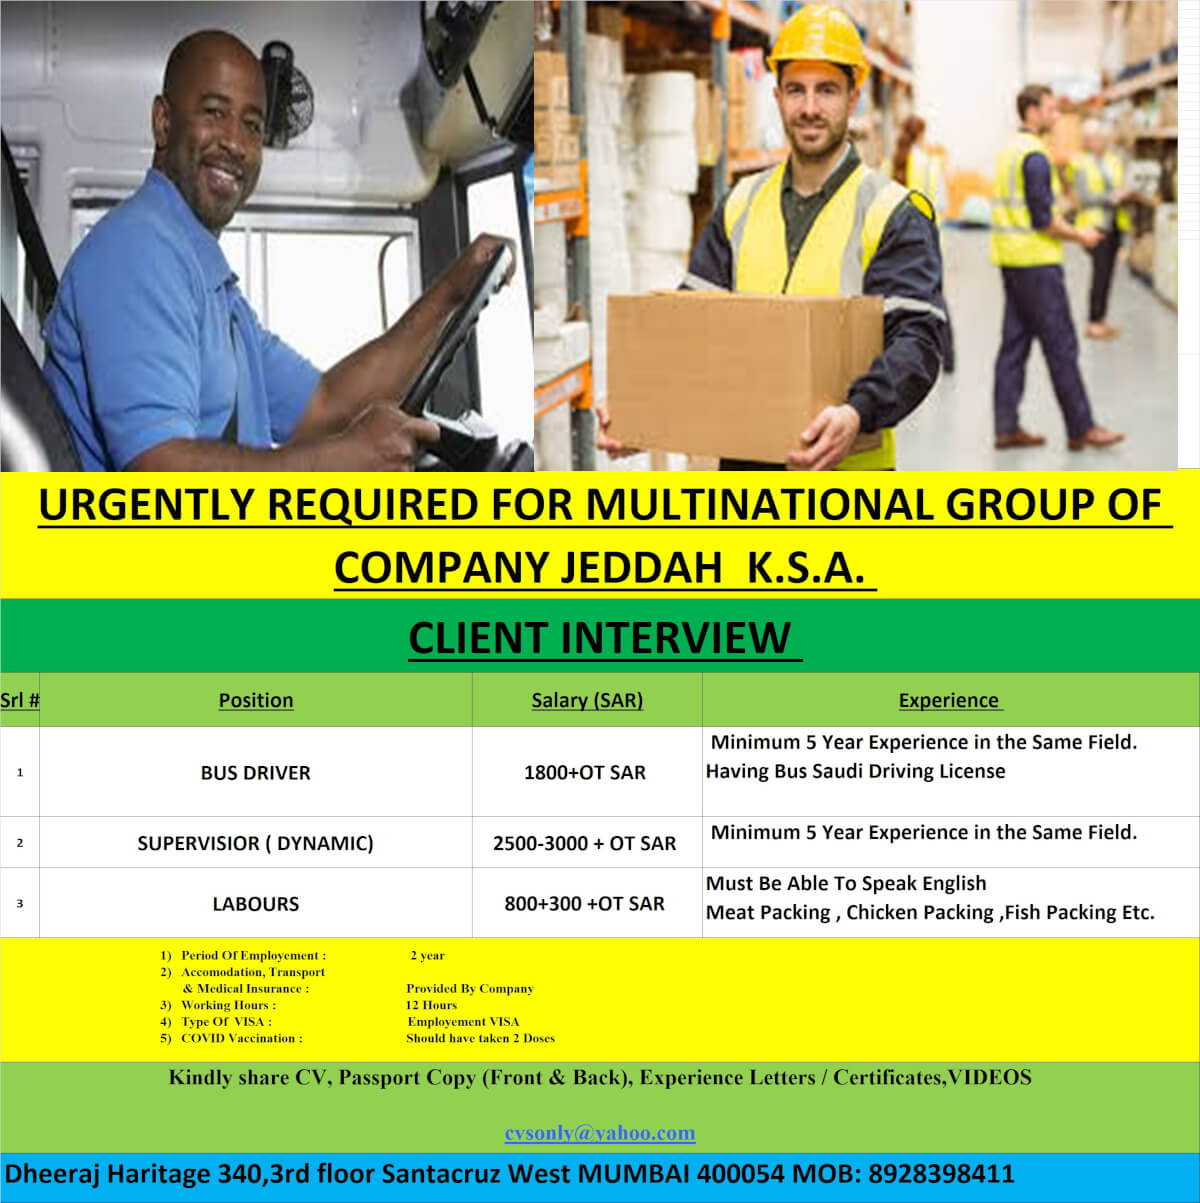 URGENTLY REQUIRED FOR AMERICANA FOOD FACTORY K.S.A.